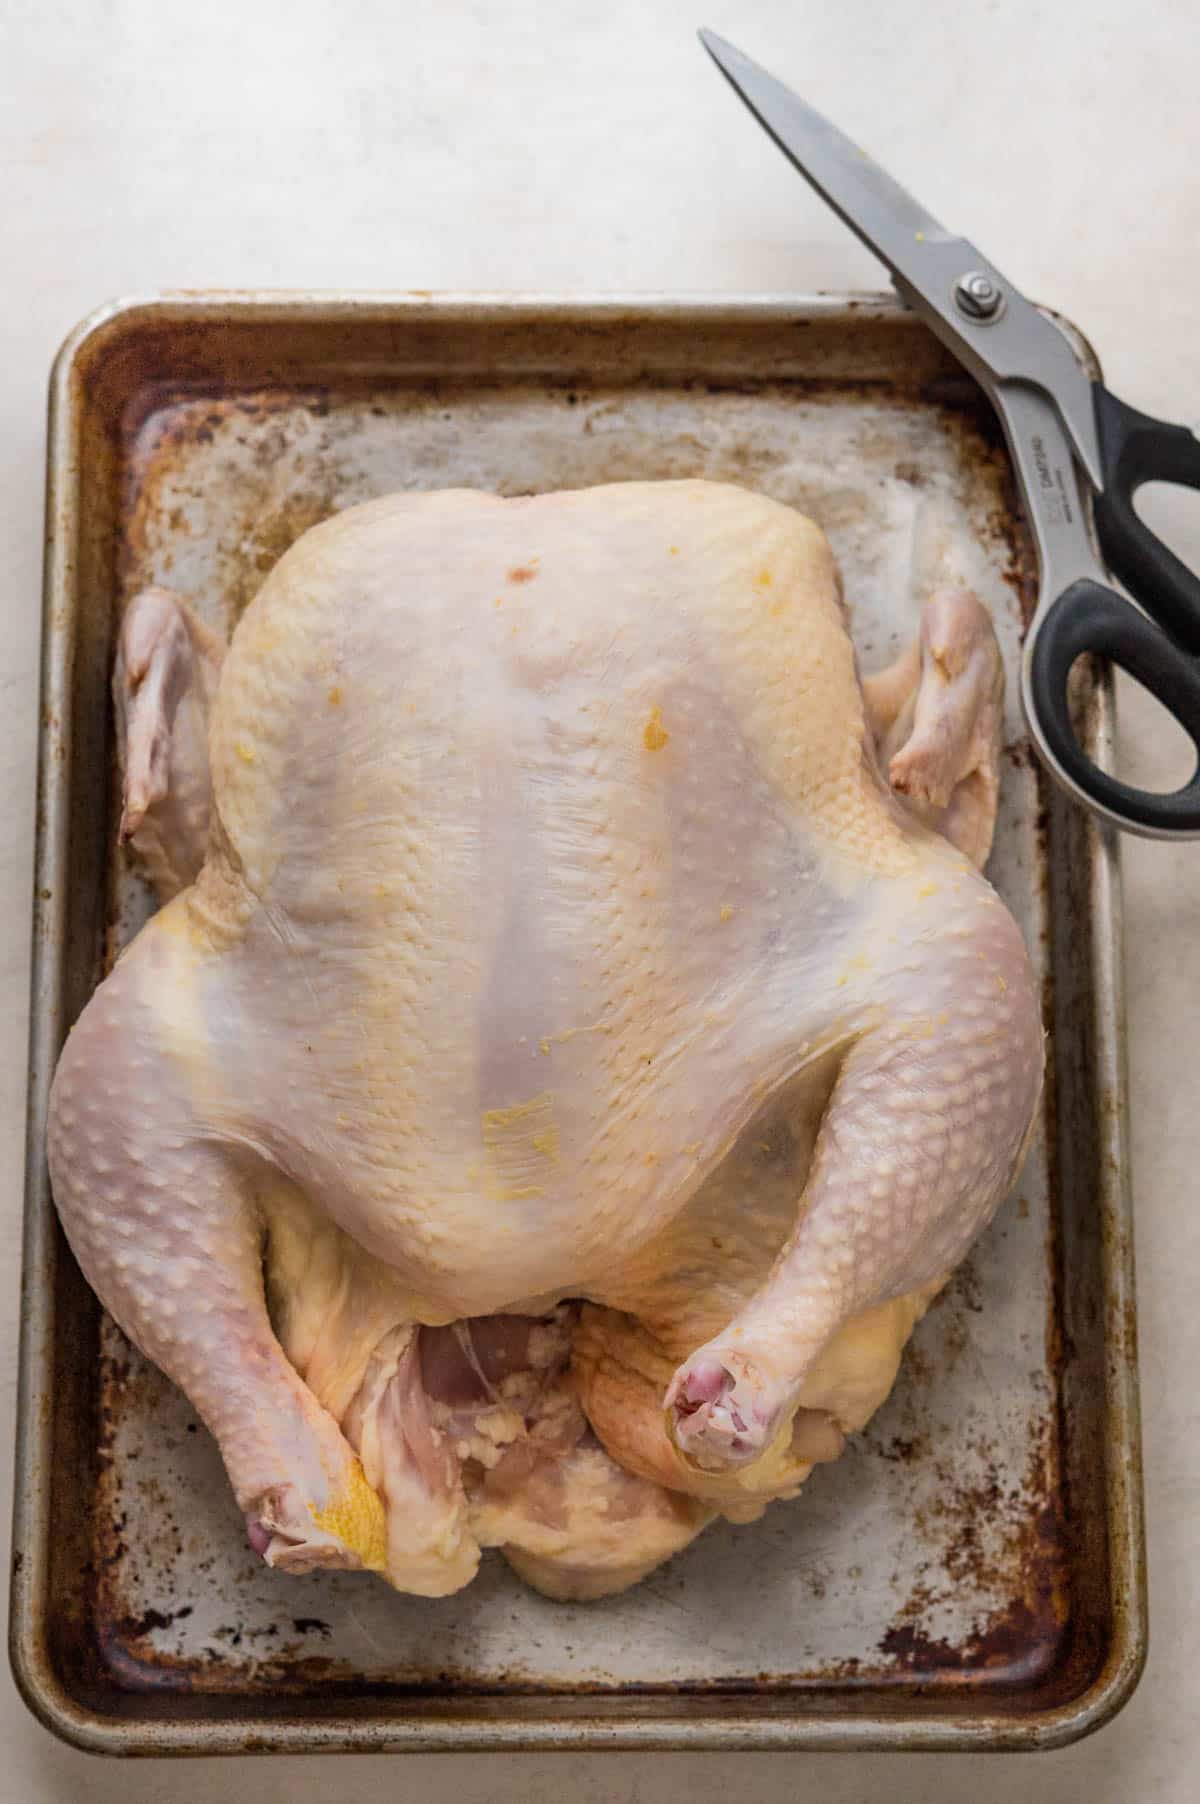 A whole chicken breast side up on a sheet pan with a pair of shears.